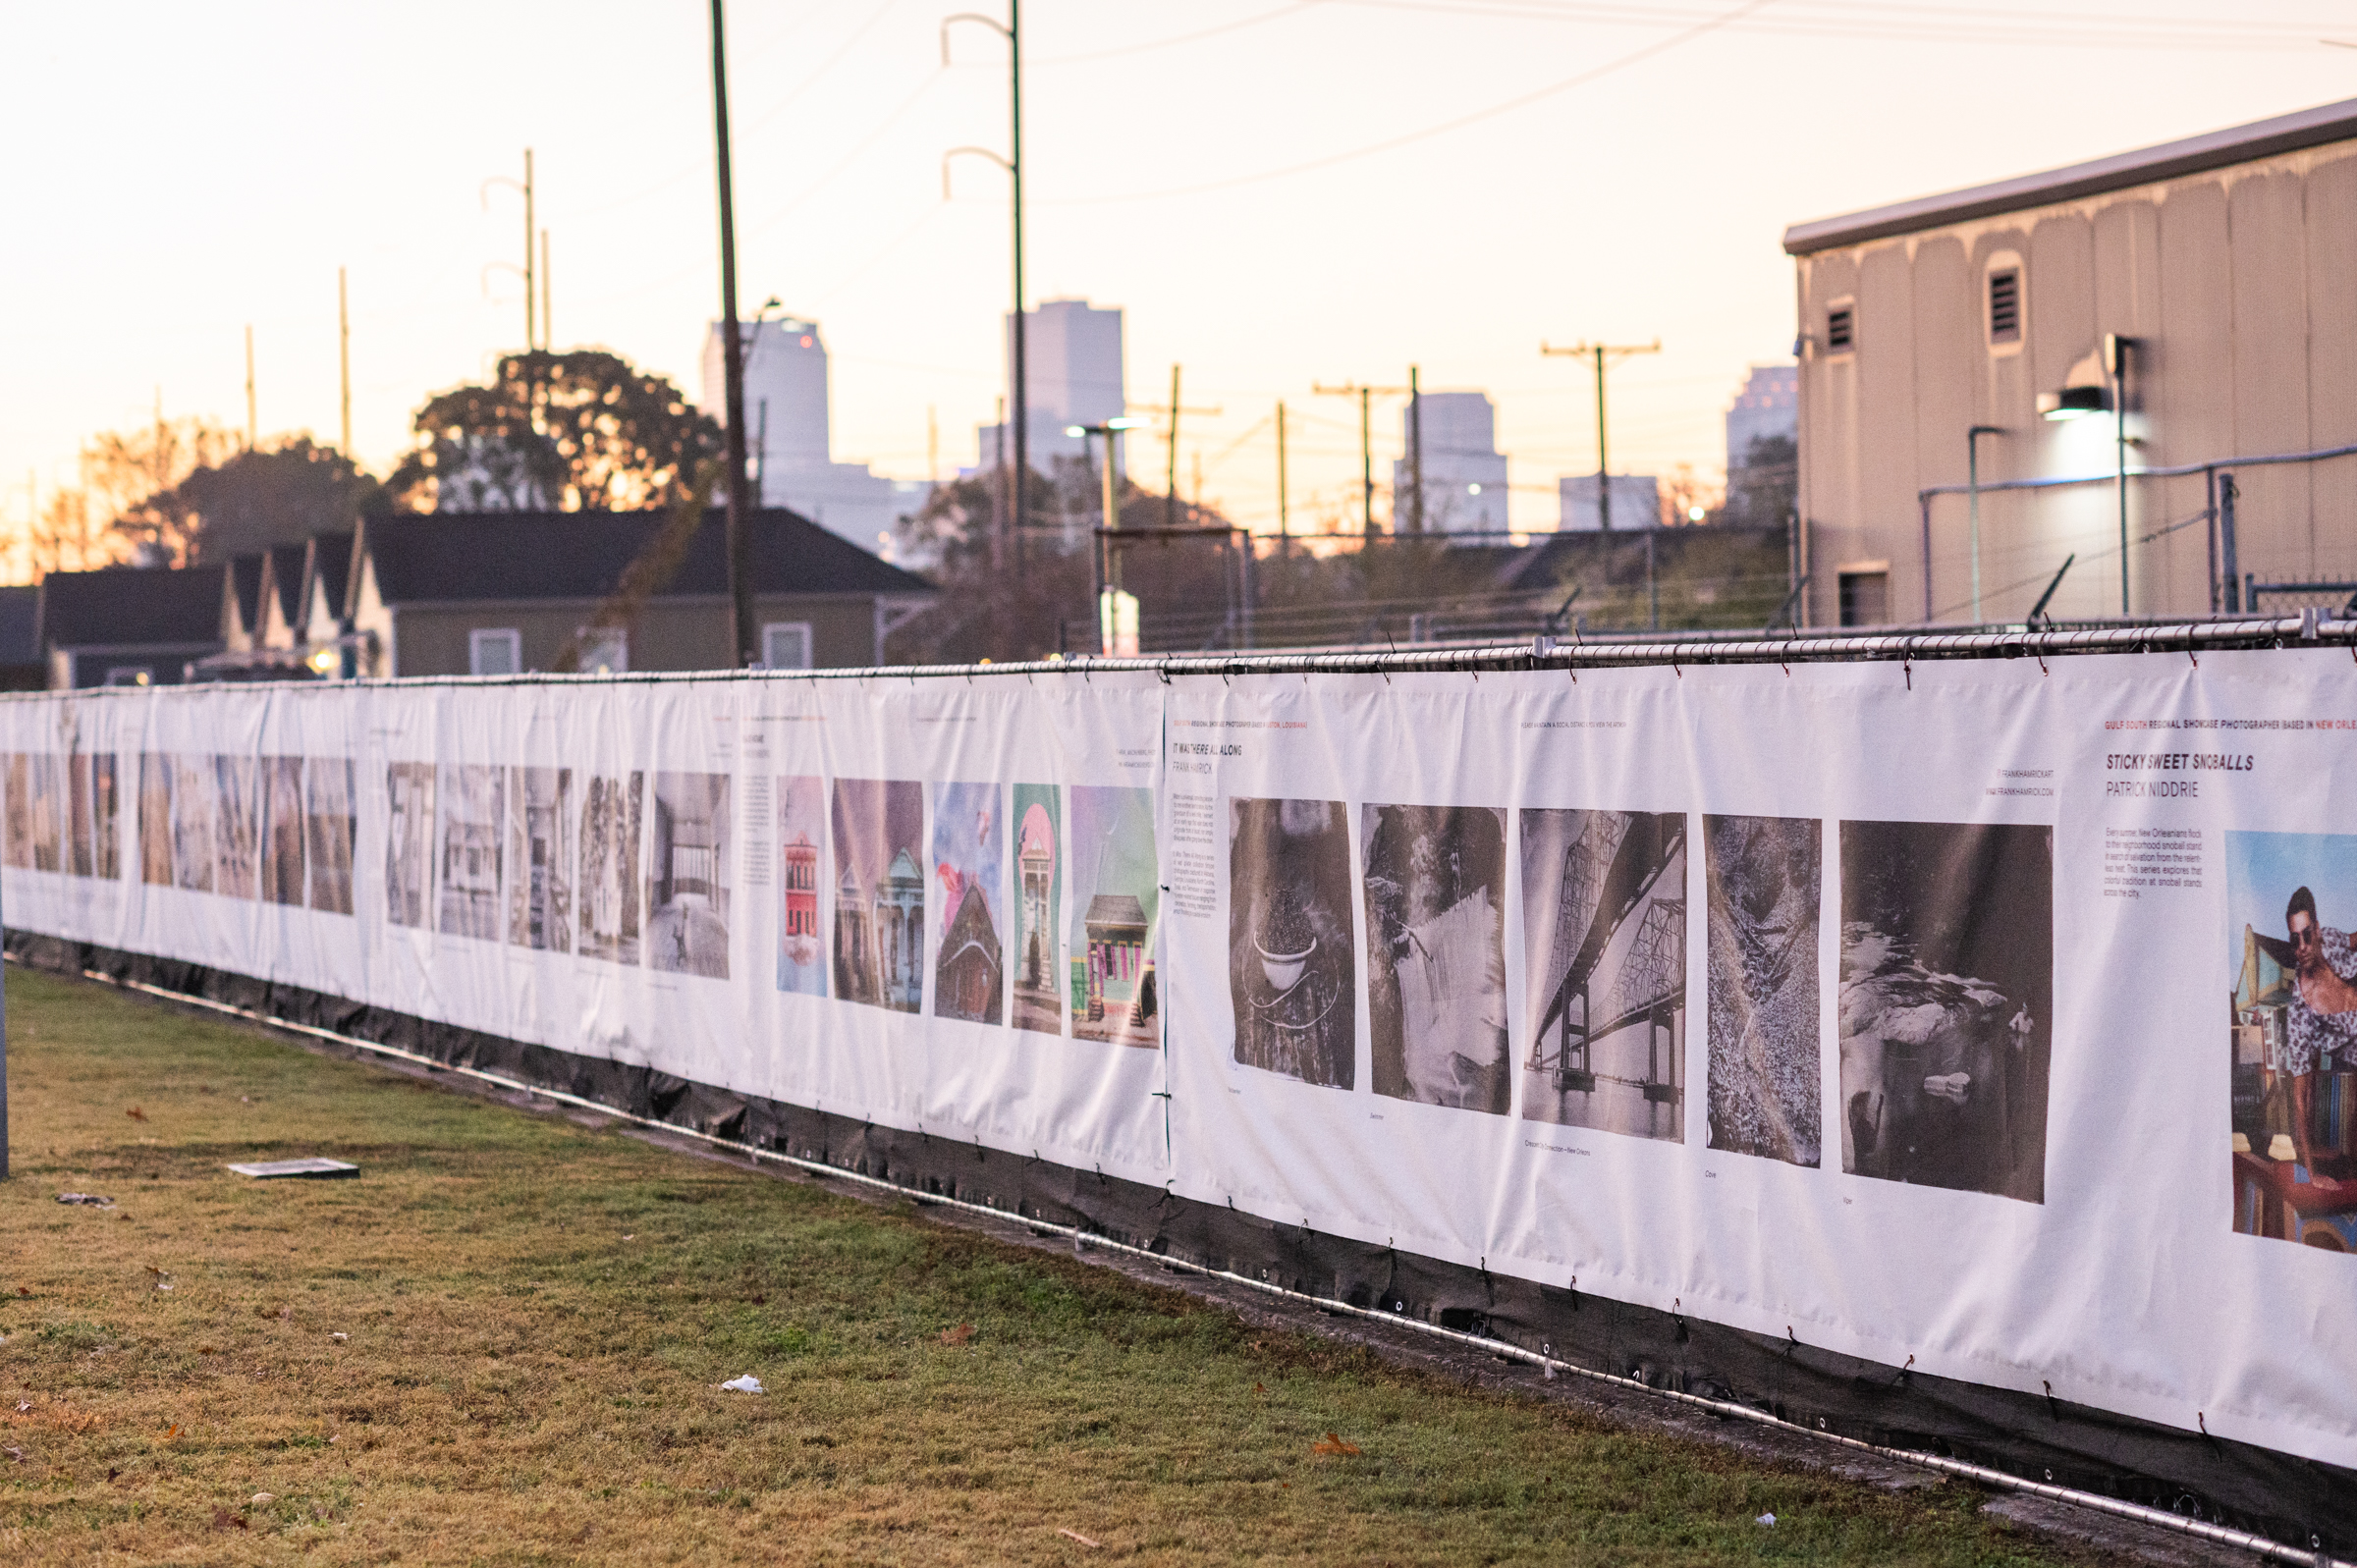 The outdoor banners display the works of 48 photographers from around the world